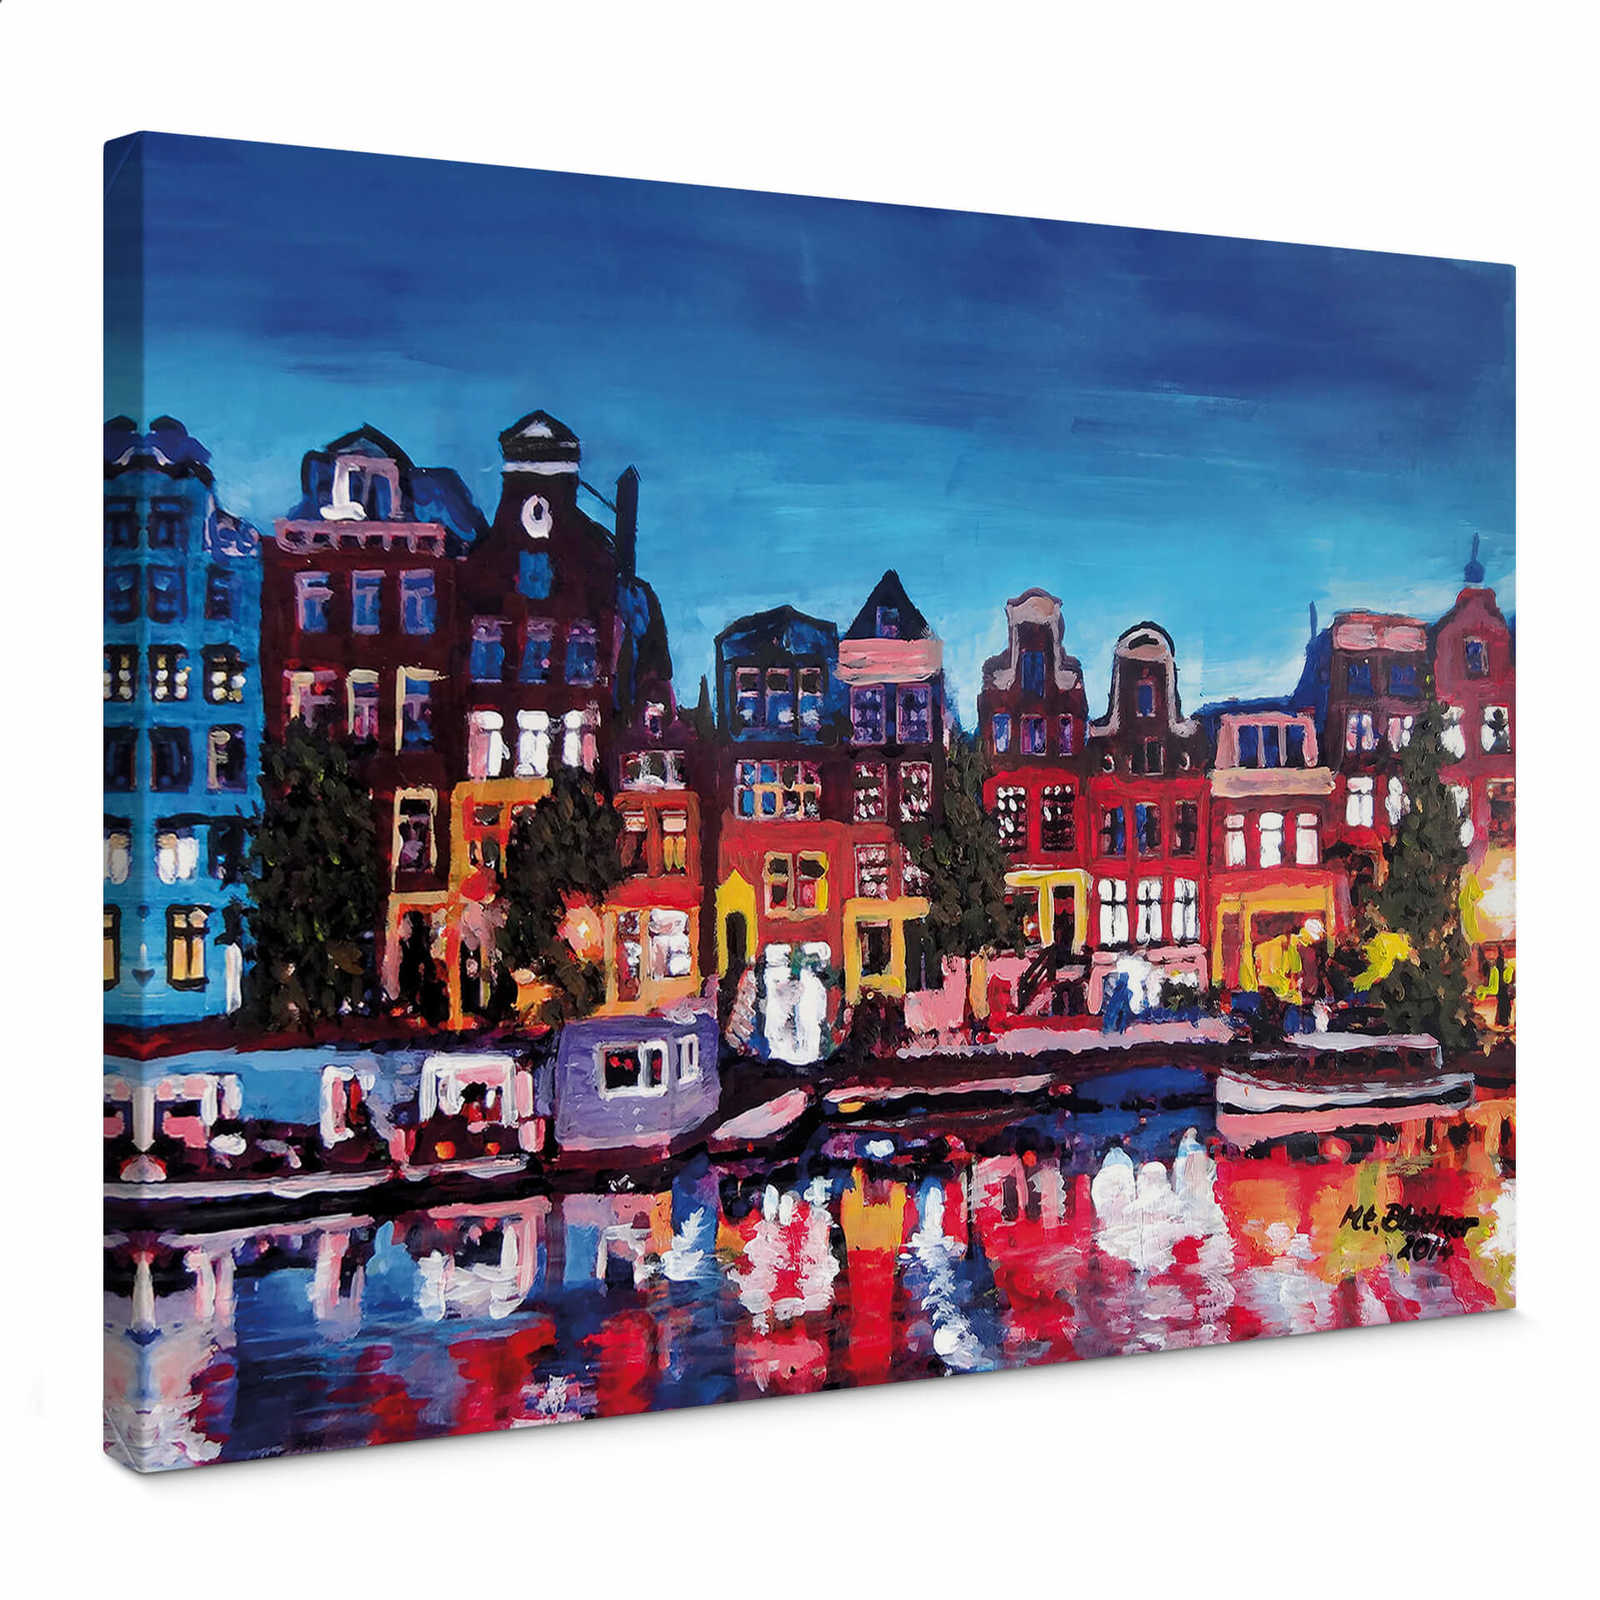         Canvas print "Amsterdam" by Bleichner painting
    